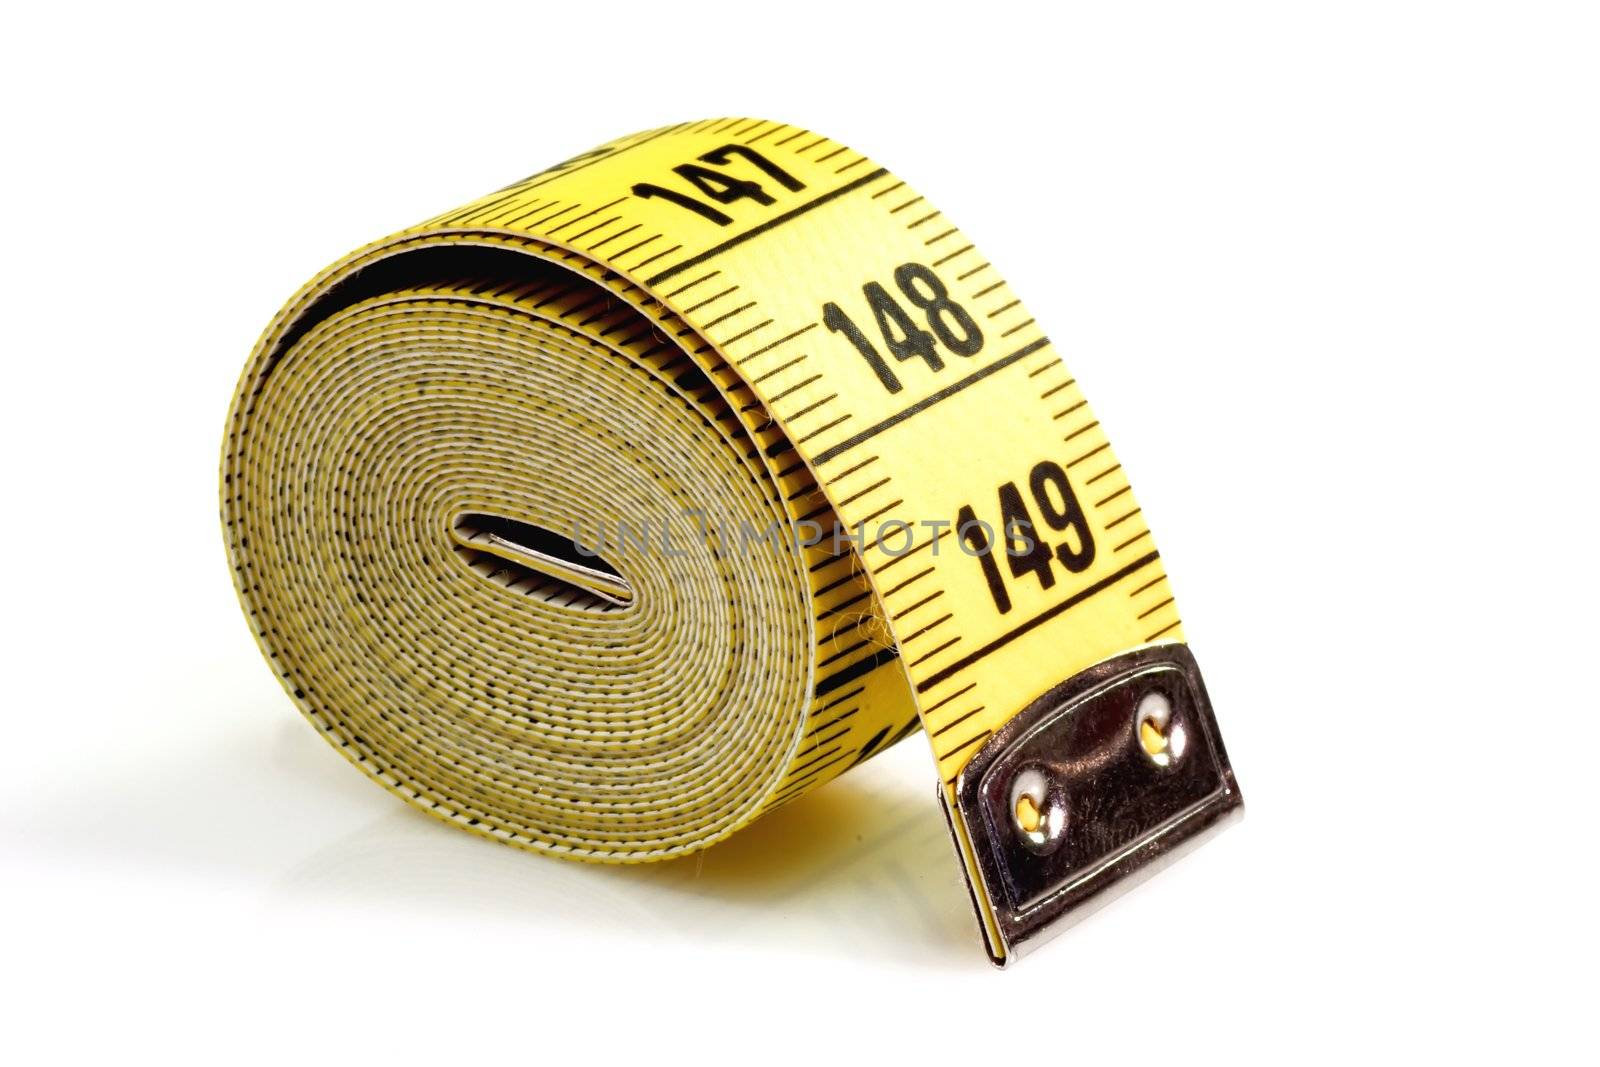 Measuring Tape by Teamarbeit